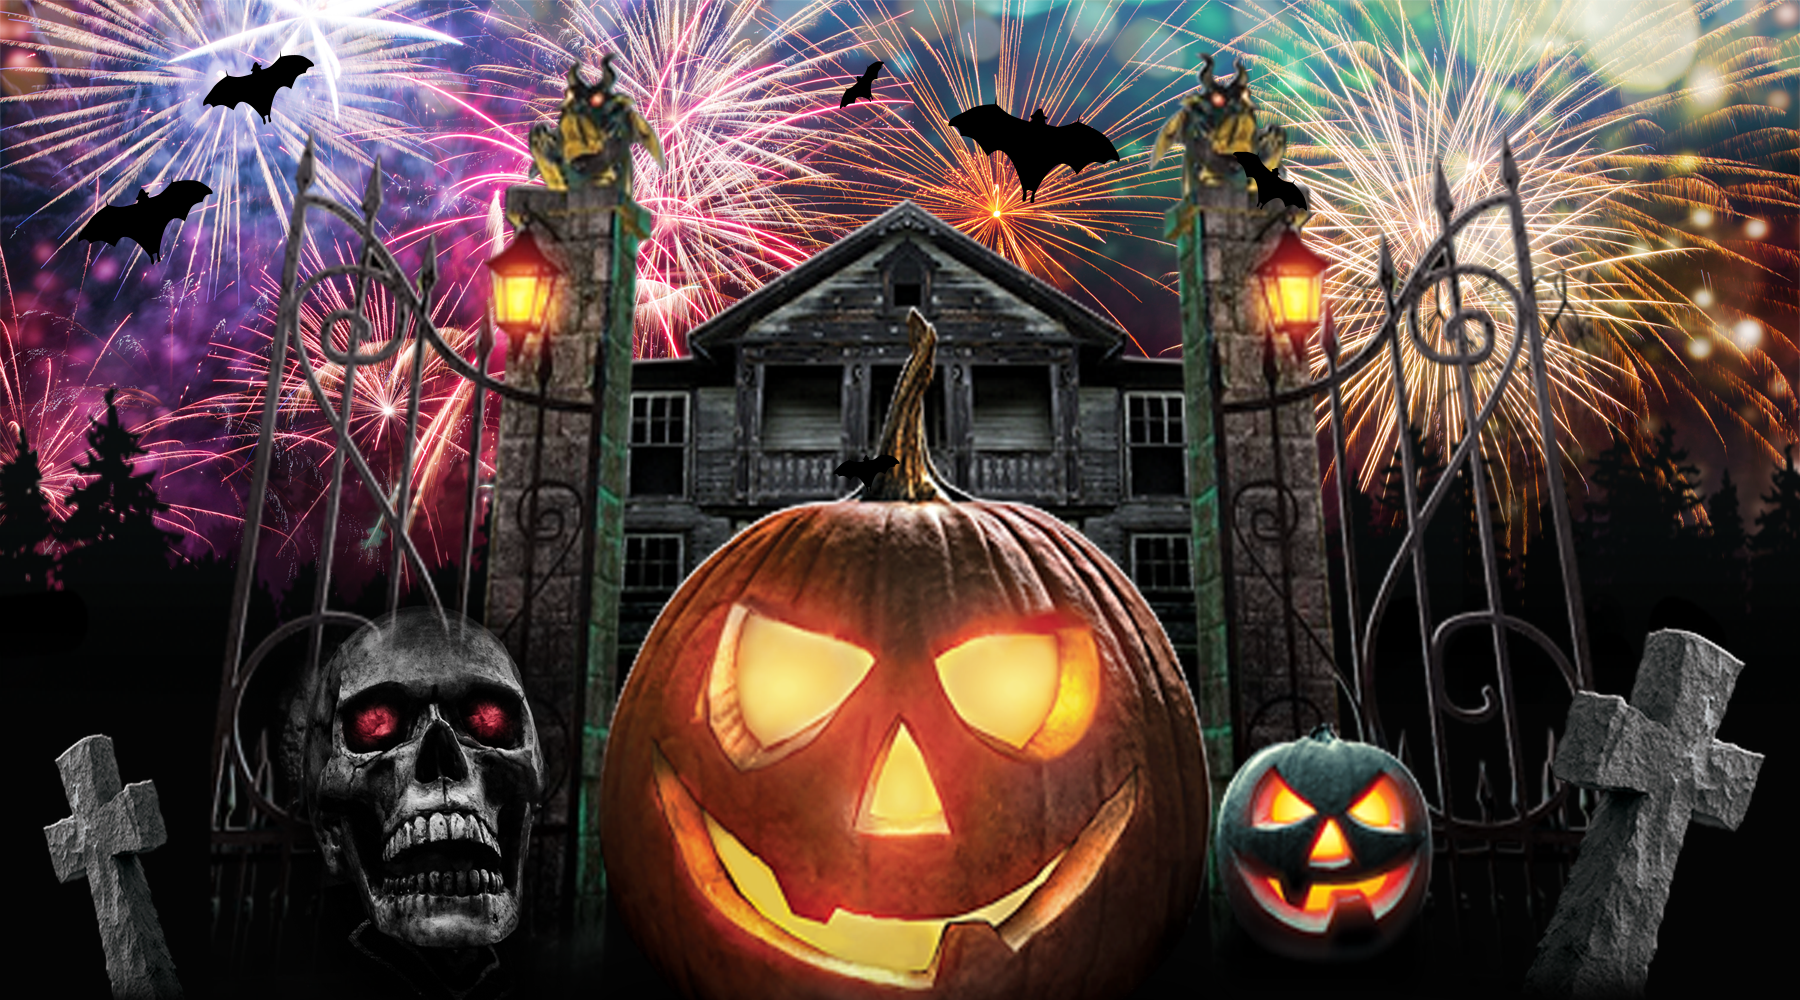 SCARY CELEBRATIONS: TOP 7 HALLOWEEN FIREWORKS